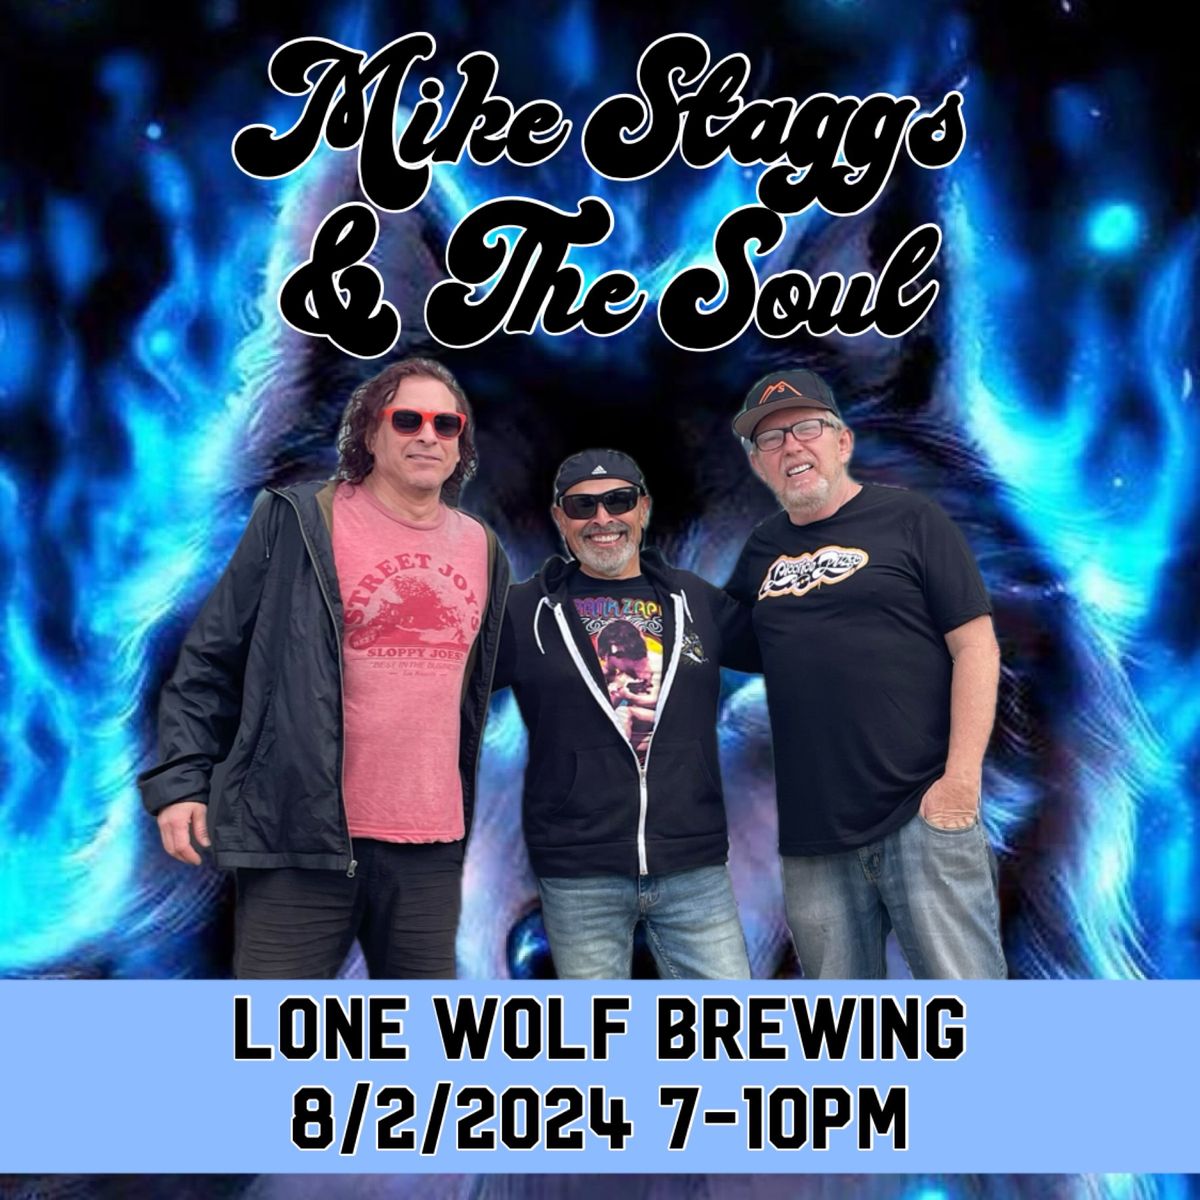 Mike Staggs & The Soul ROCKS Lone Wolf Brewing Yorba Linda!